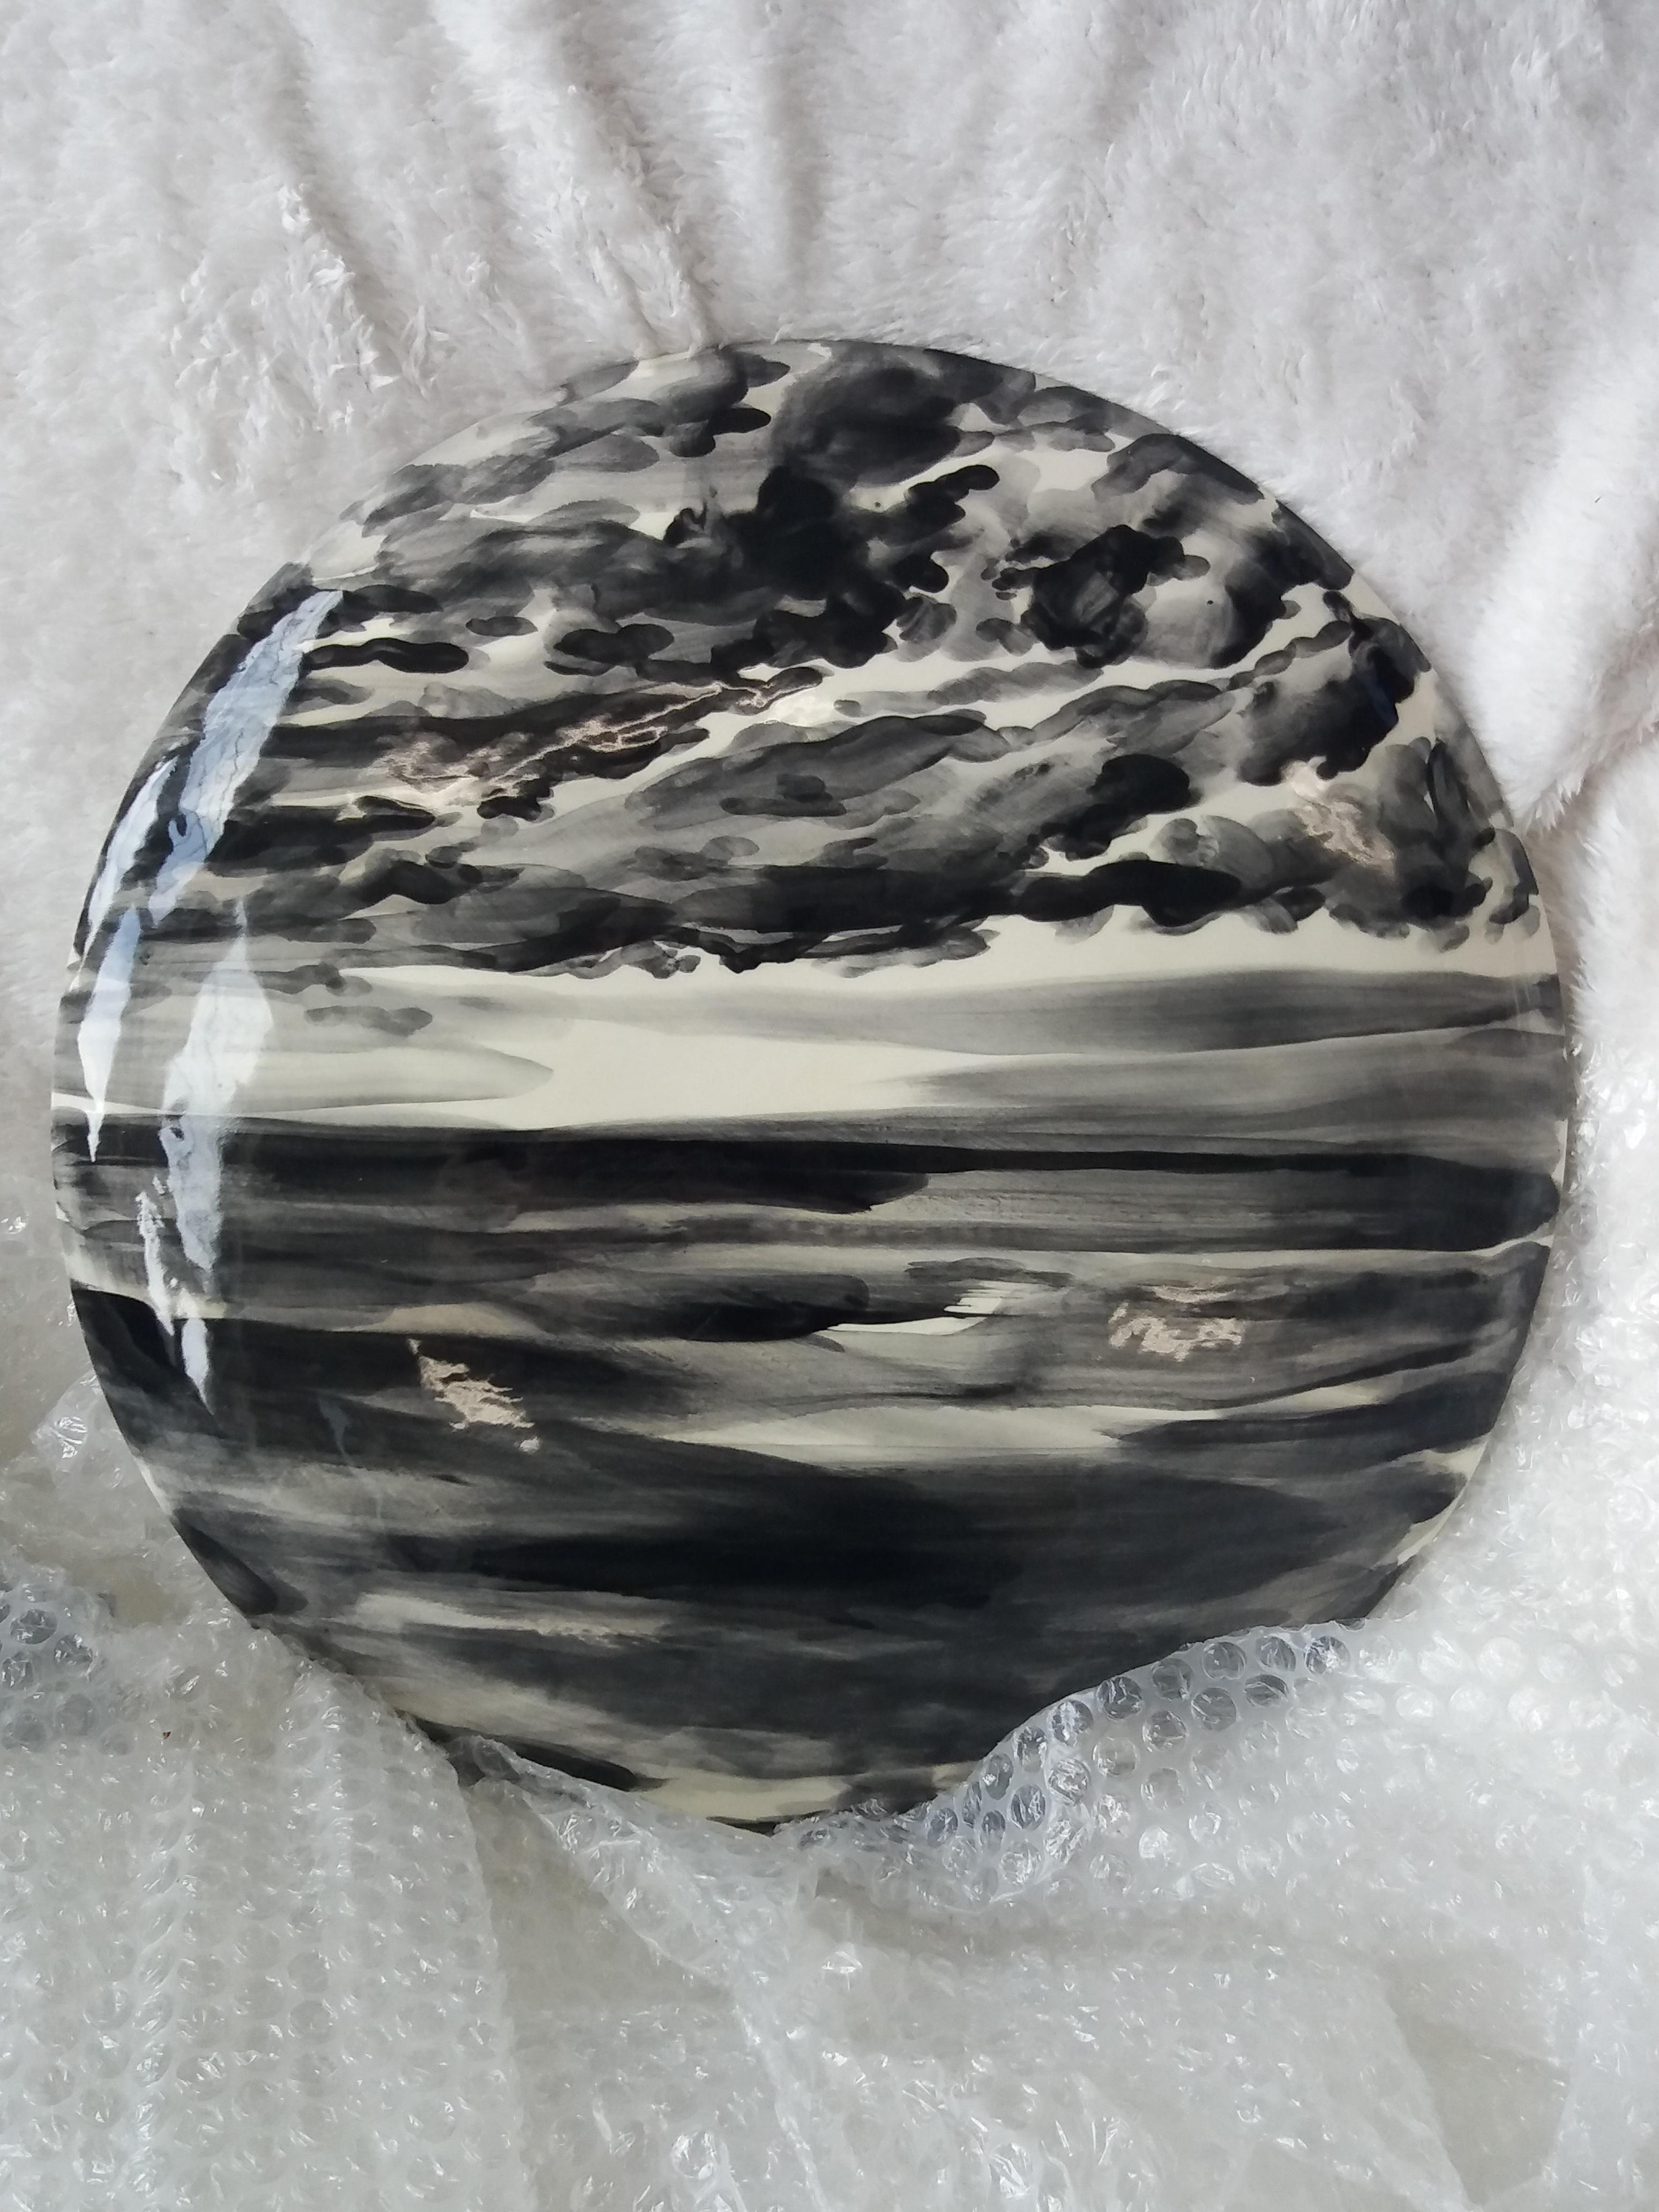 "Moonlit - lighted by the moon", painted ceramic, 35 x 35 cm., 2021